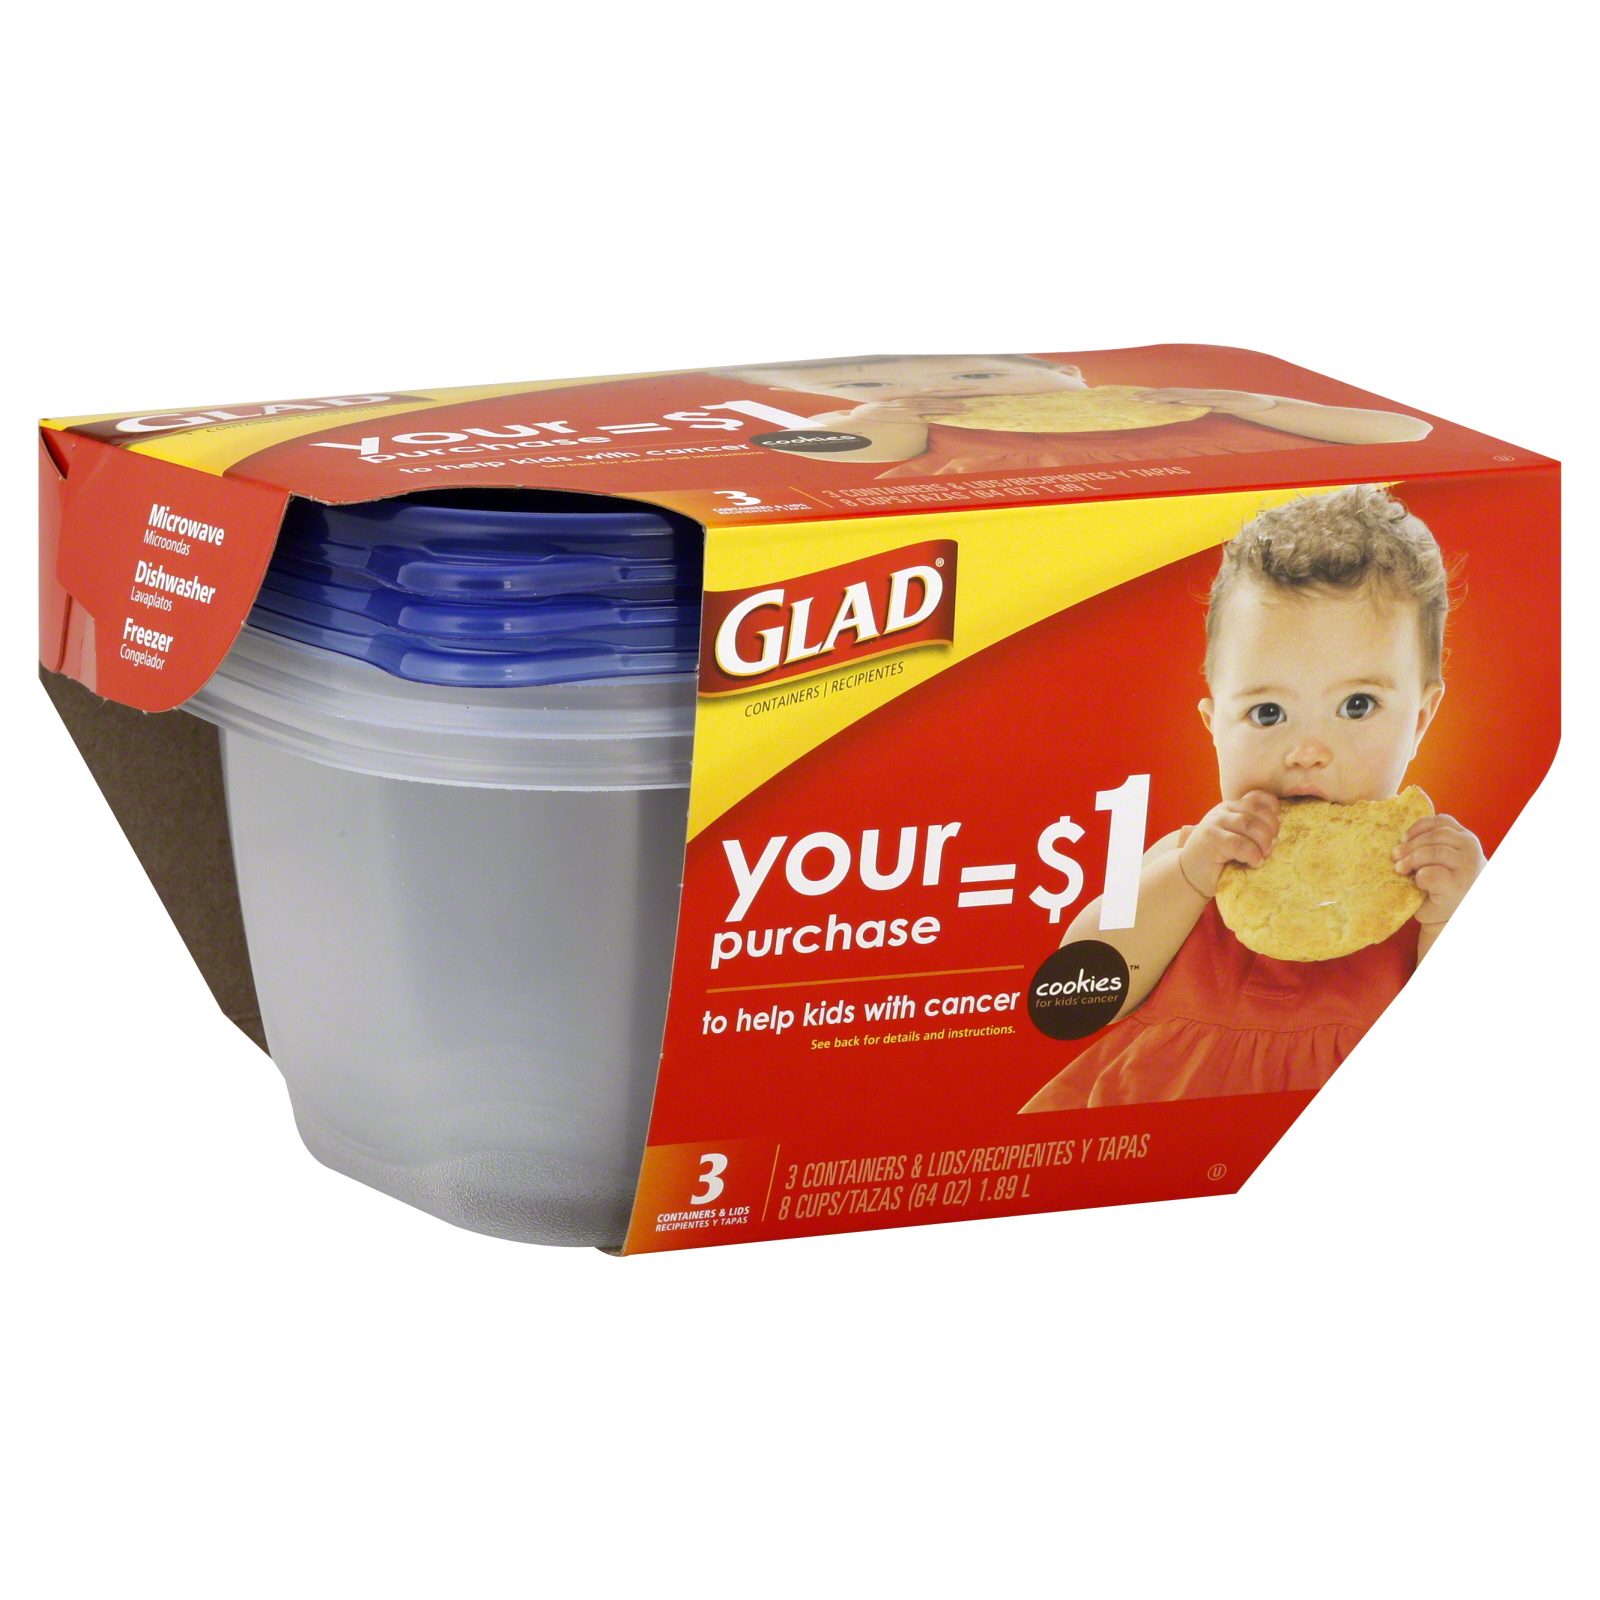 Glad Containers & Lids, 8 Cups, 3 containers